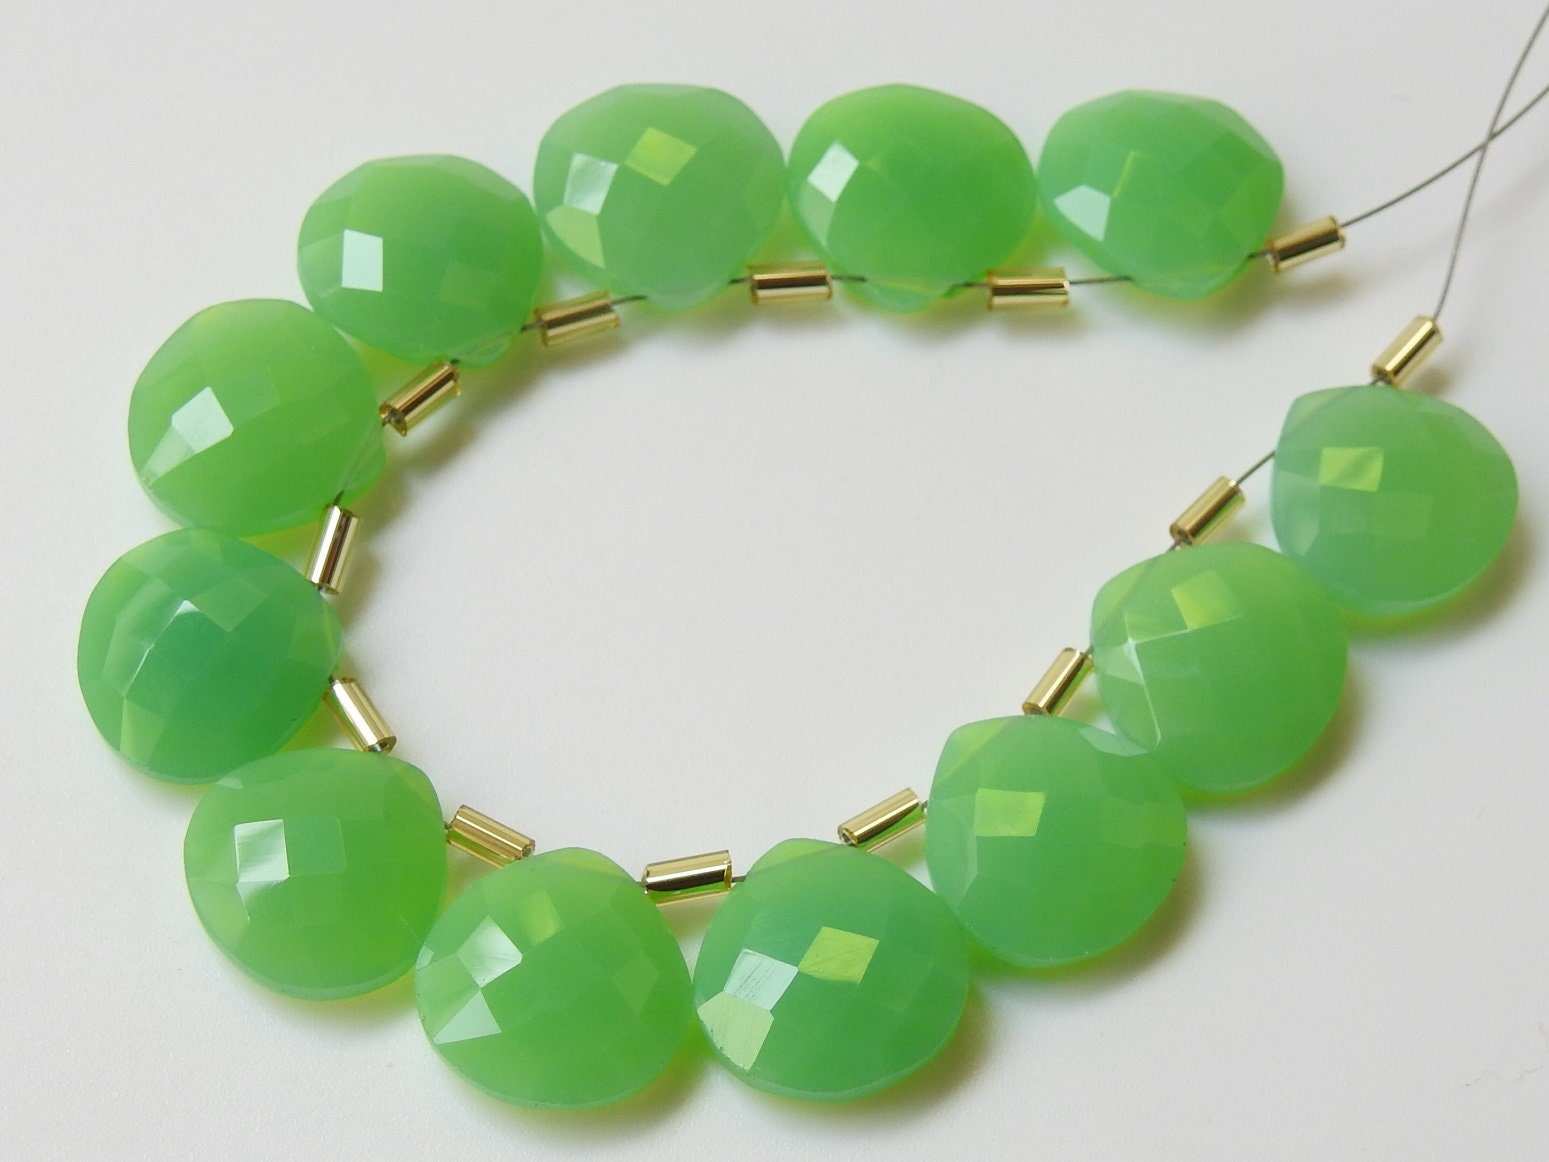 Chrysoprase Green Chalcedony Faceted Heart,Teardrop,Drops,Briolettes,Wholesaler,Supplies,14X14MM Approx PME-CY1 | Save 33% - Rajasthan Living 16